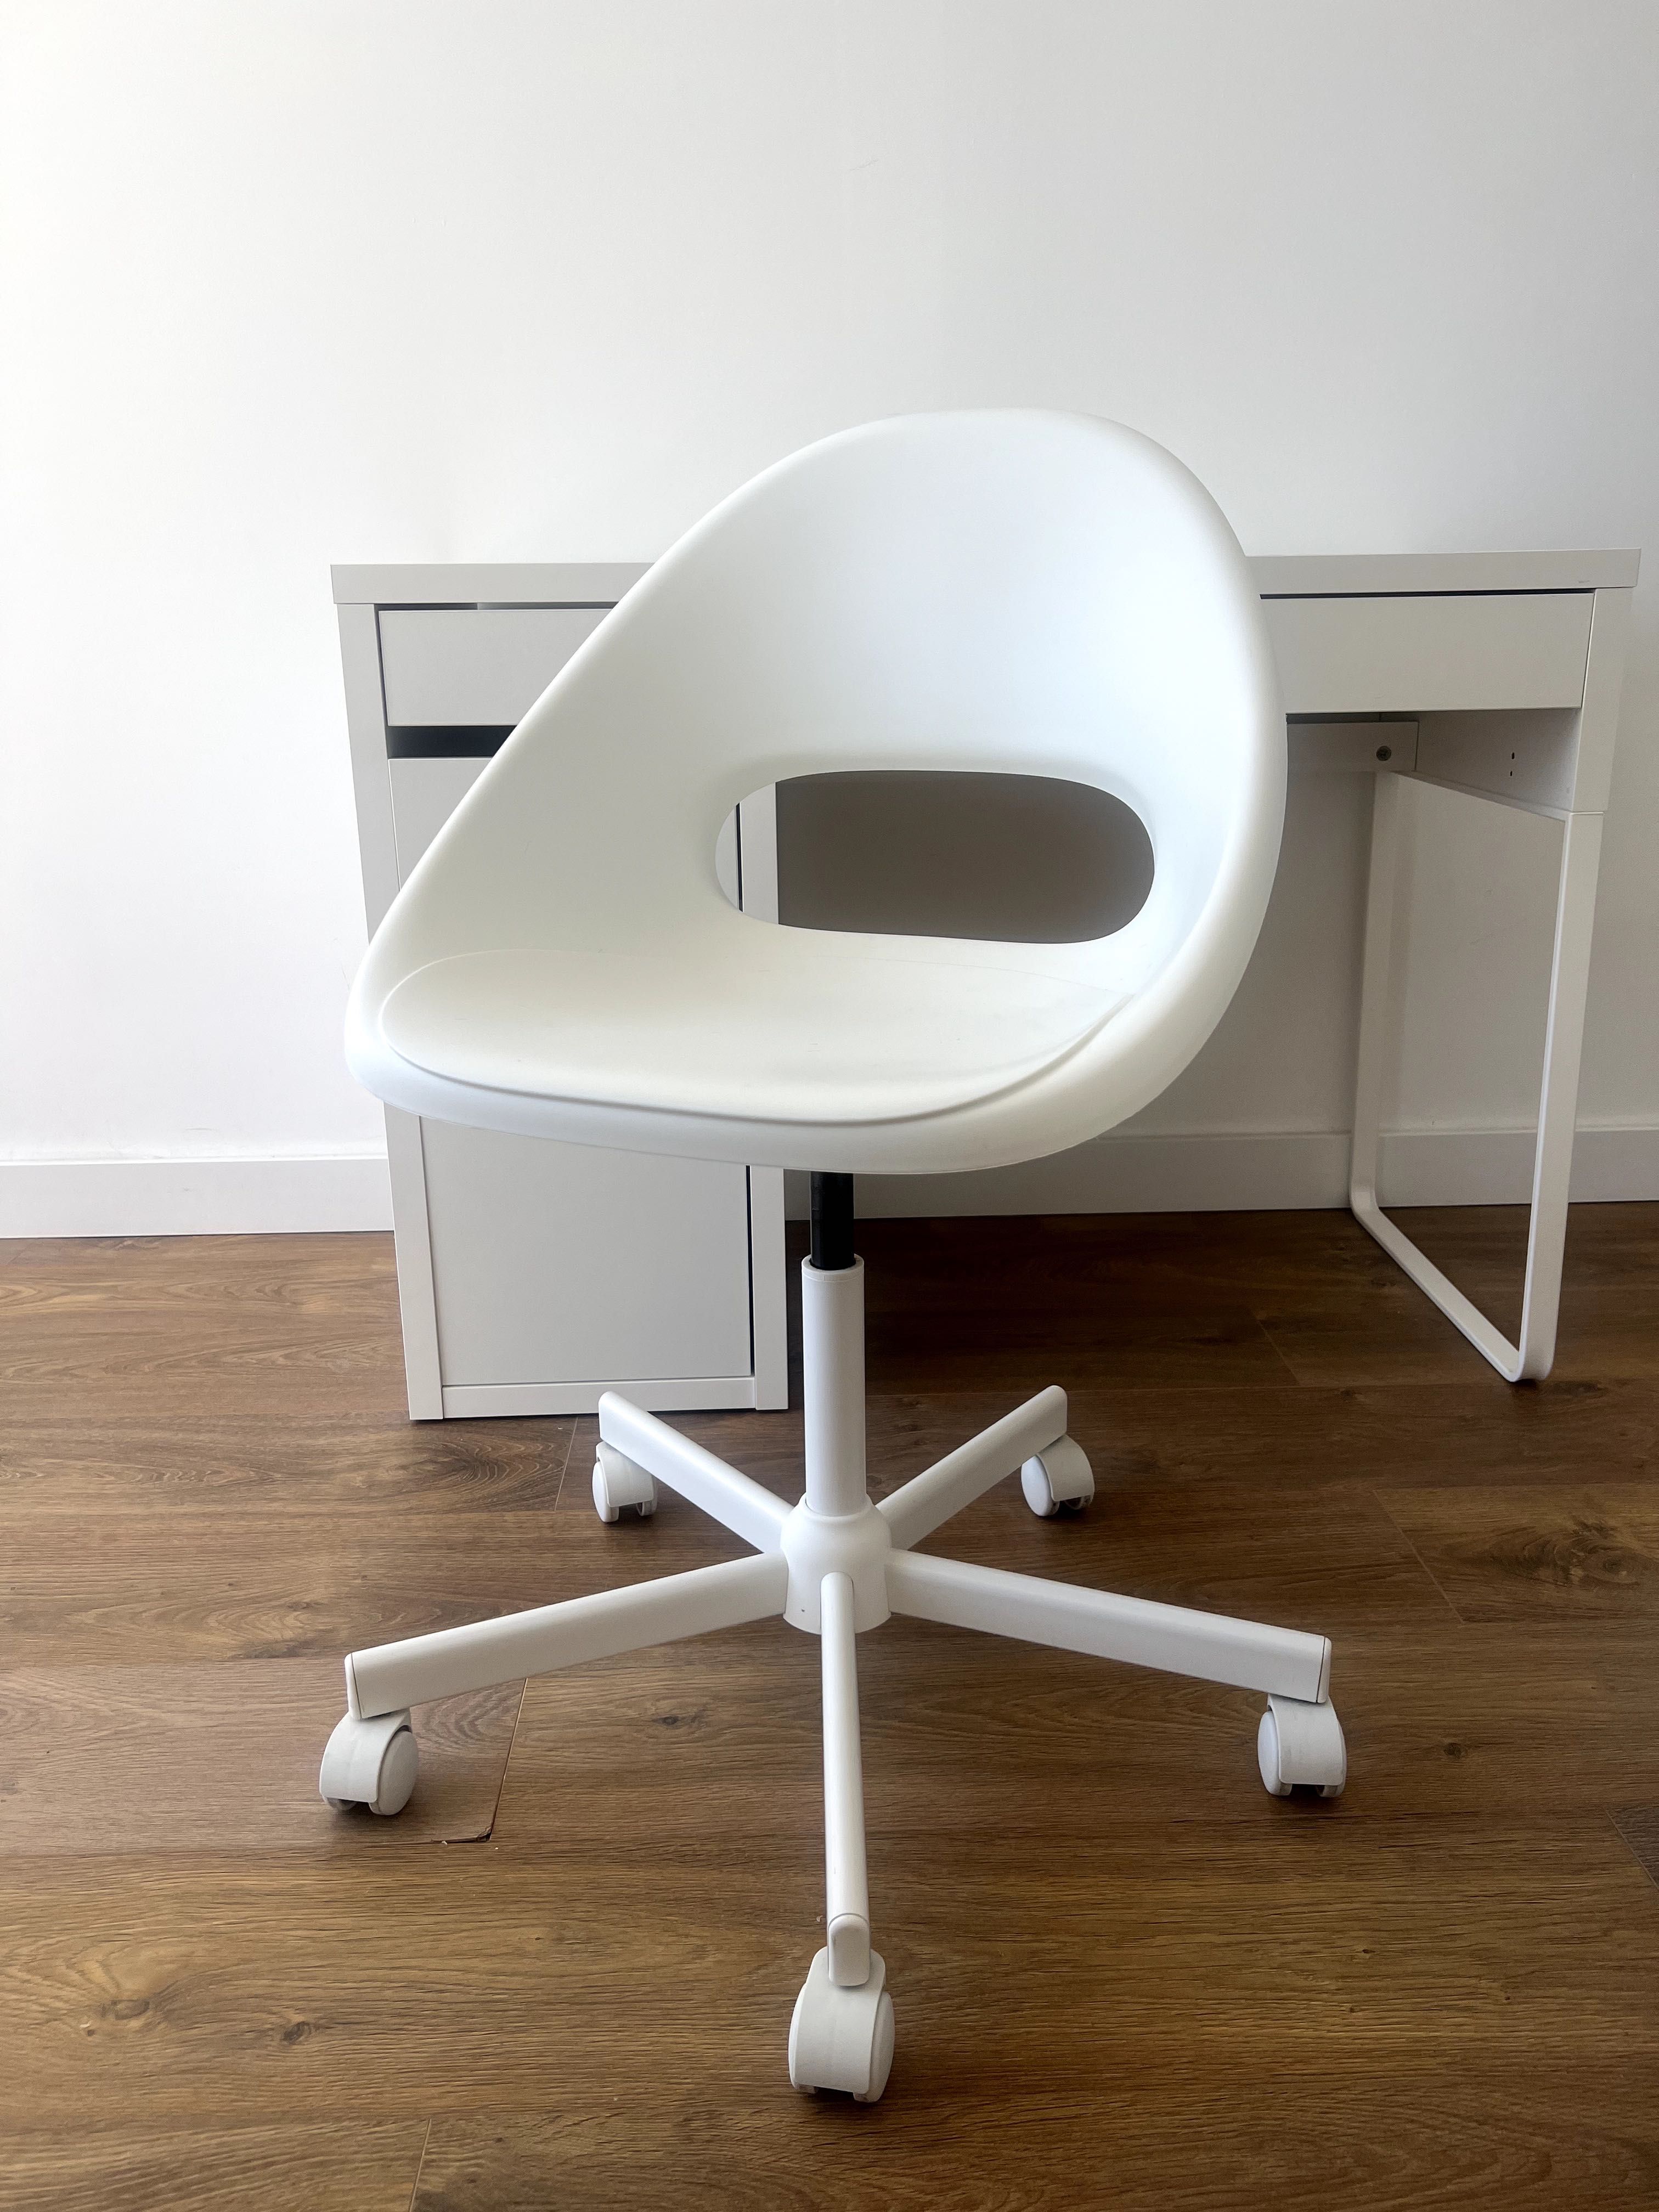 Perfect white desk and chair from  IKEA.